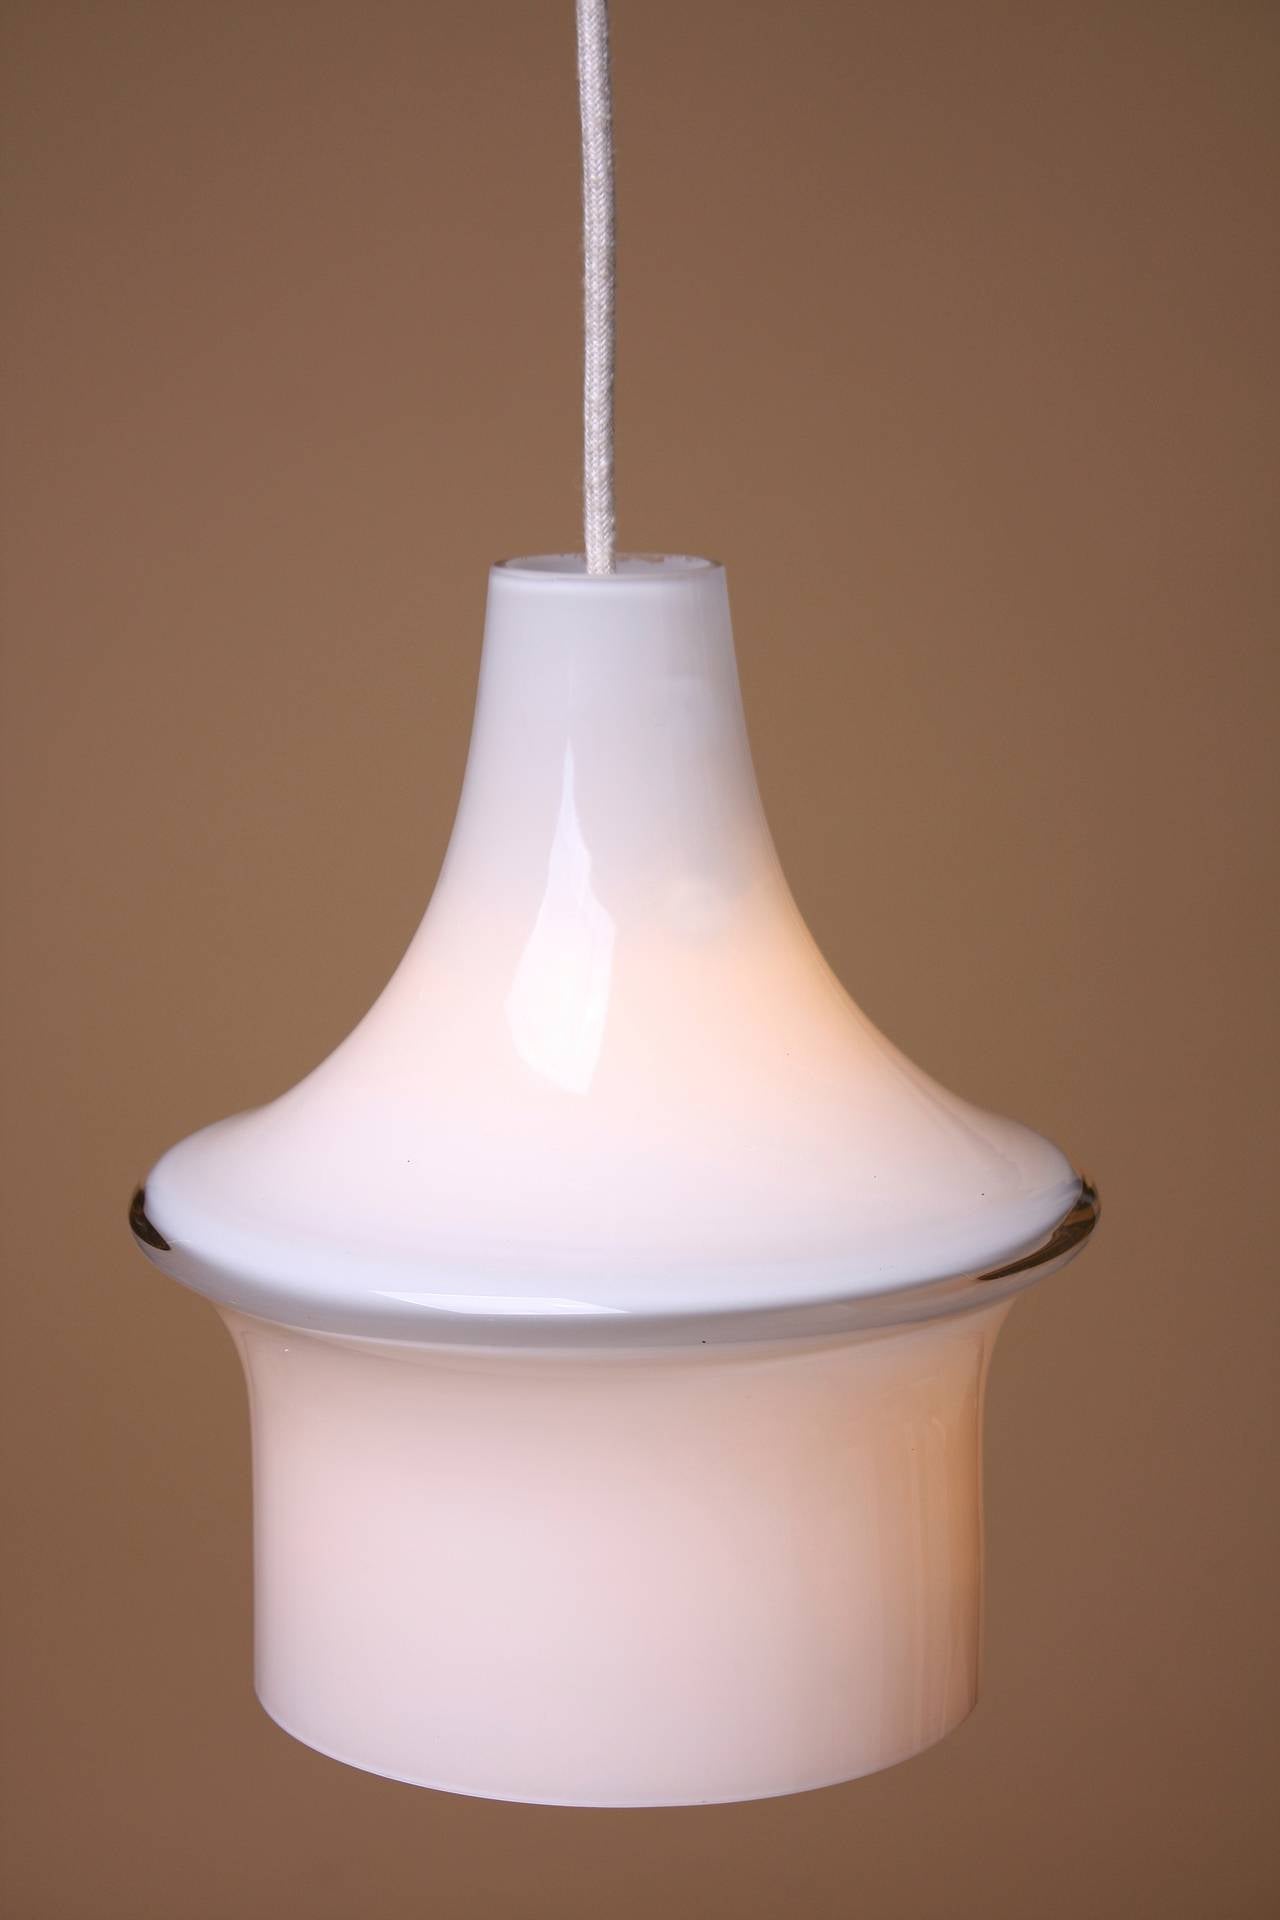 An opaque glass bell shaped pendant by Lisa Johansson-Pape, circa 1960. Beautiful example of Danish Mid-Century design. The pendant has been newly rewired on three feet of canvas cloth cord.